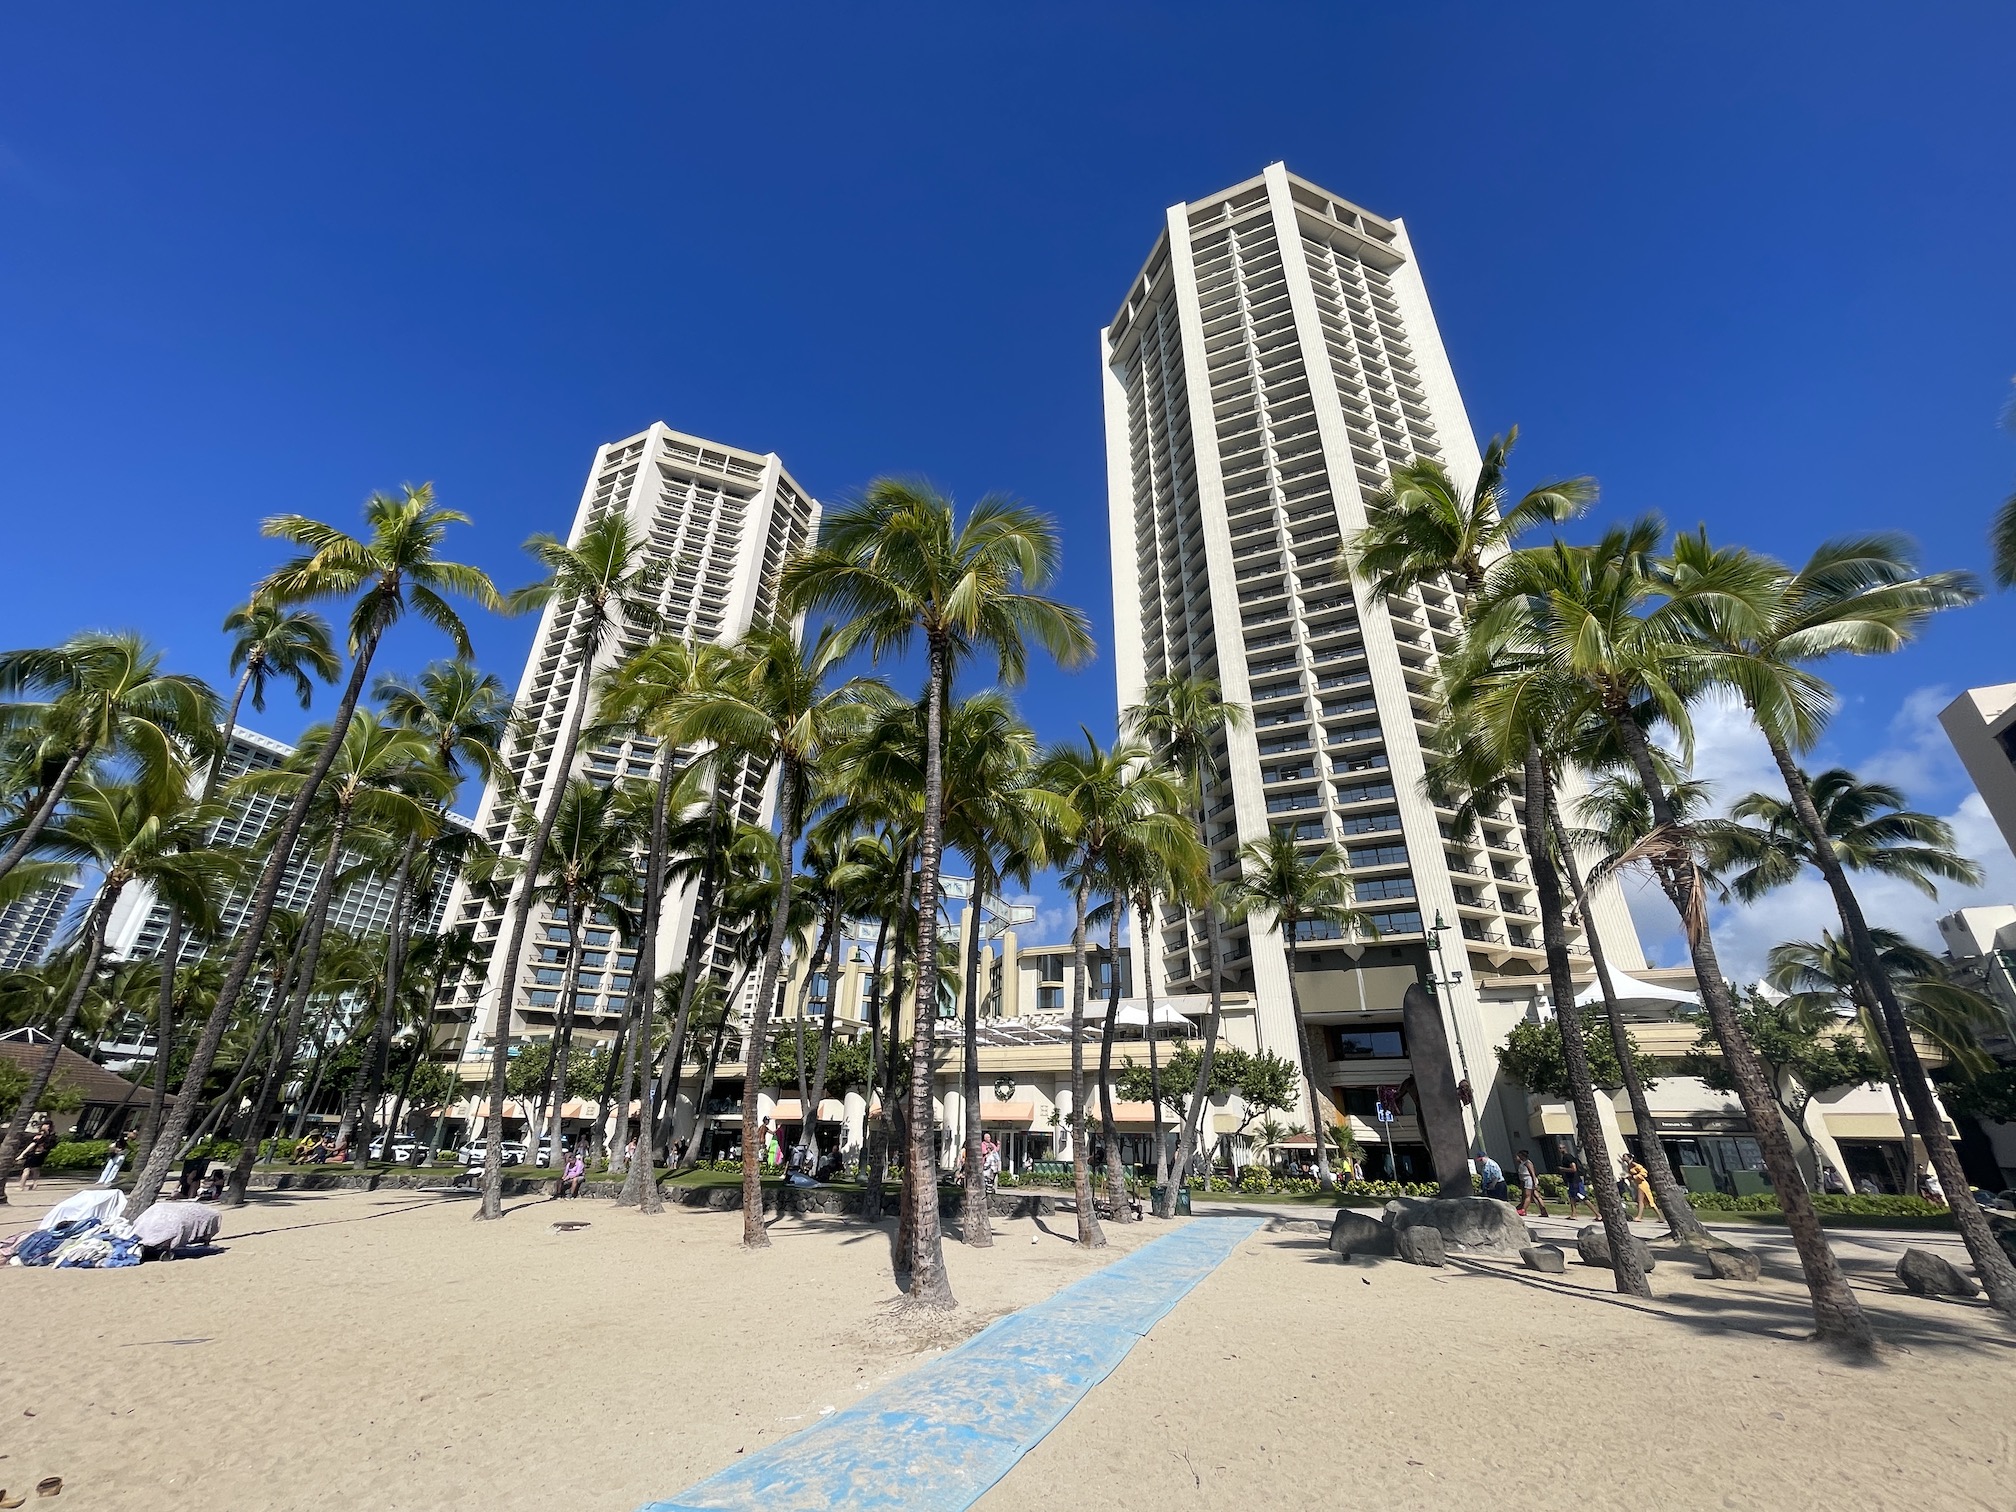 Waikiki Beach Marriott Resort & Spa Review: What To REALLY Expect If You  Stay